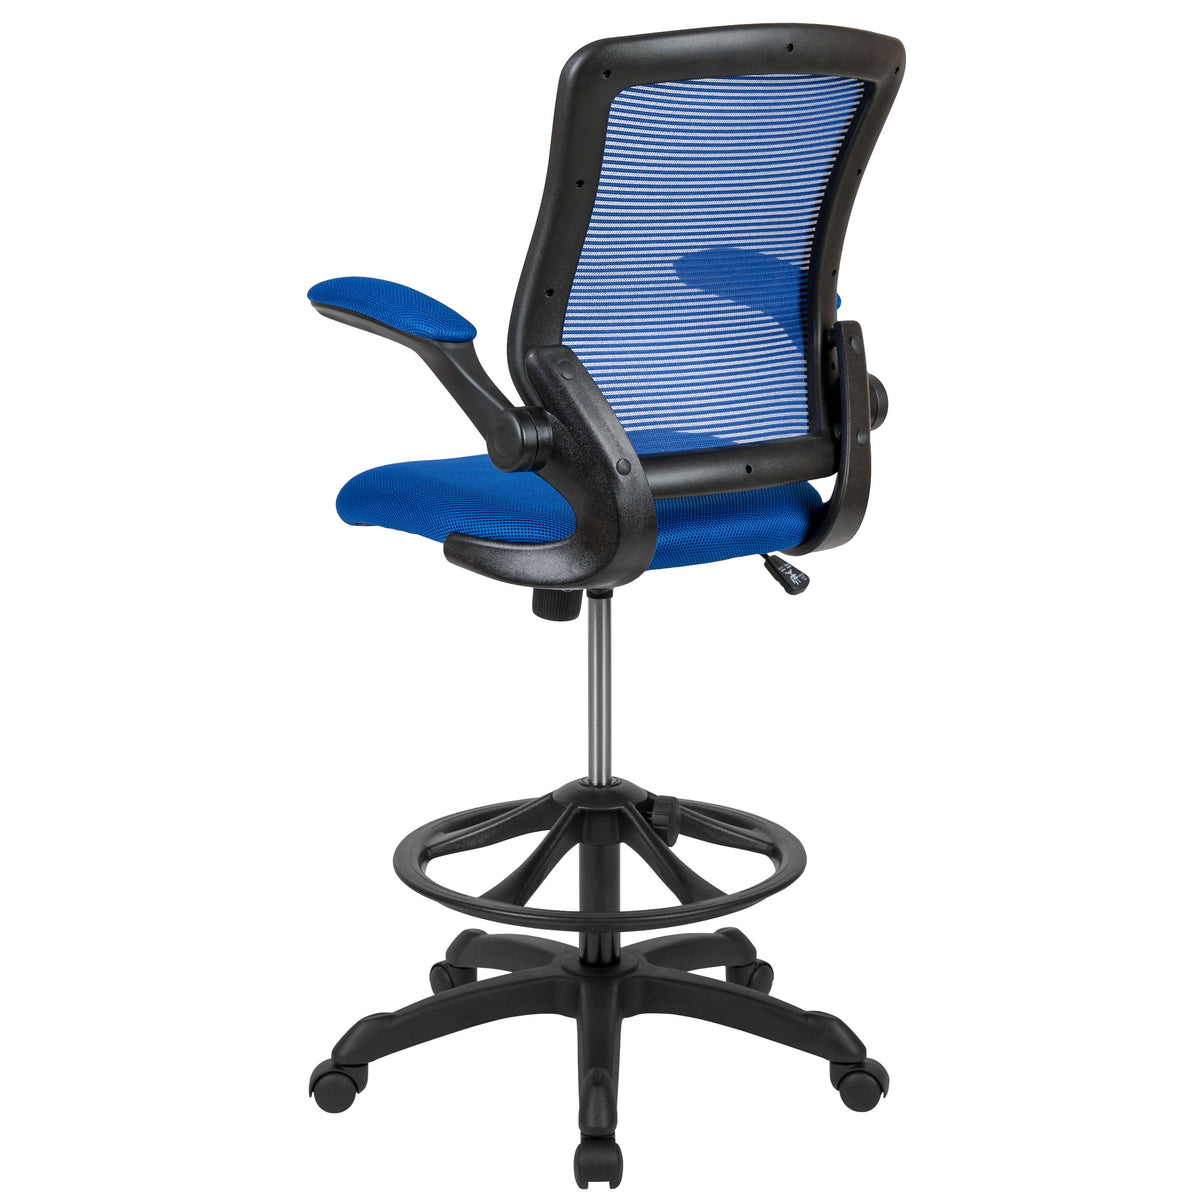 Blue |#| Mid-Back Blue Mesh Ergonomic Drafting Chair with Foot Ring and Flip-Up Arms